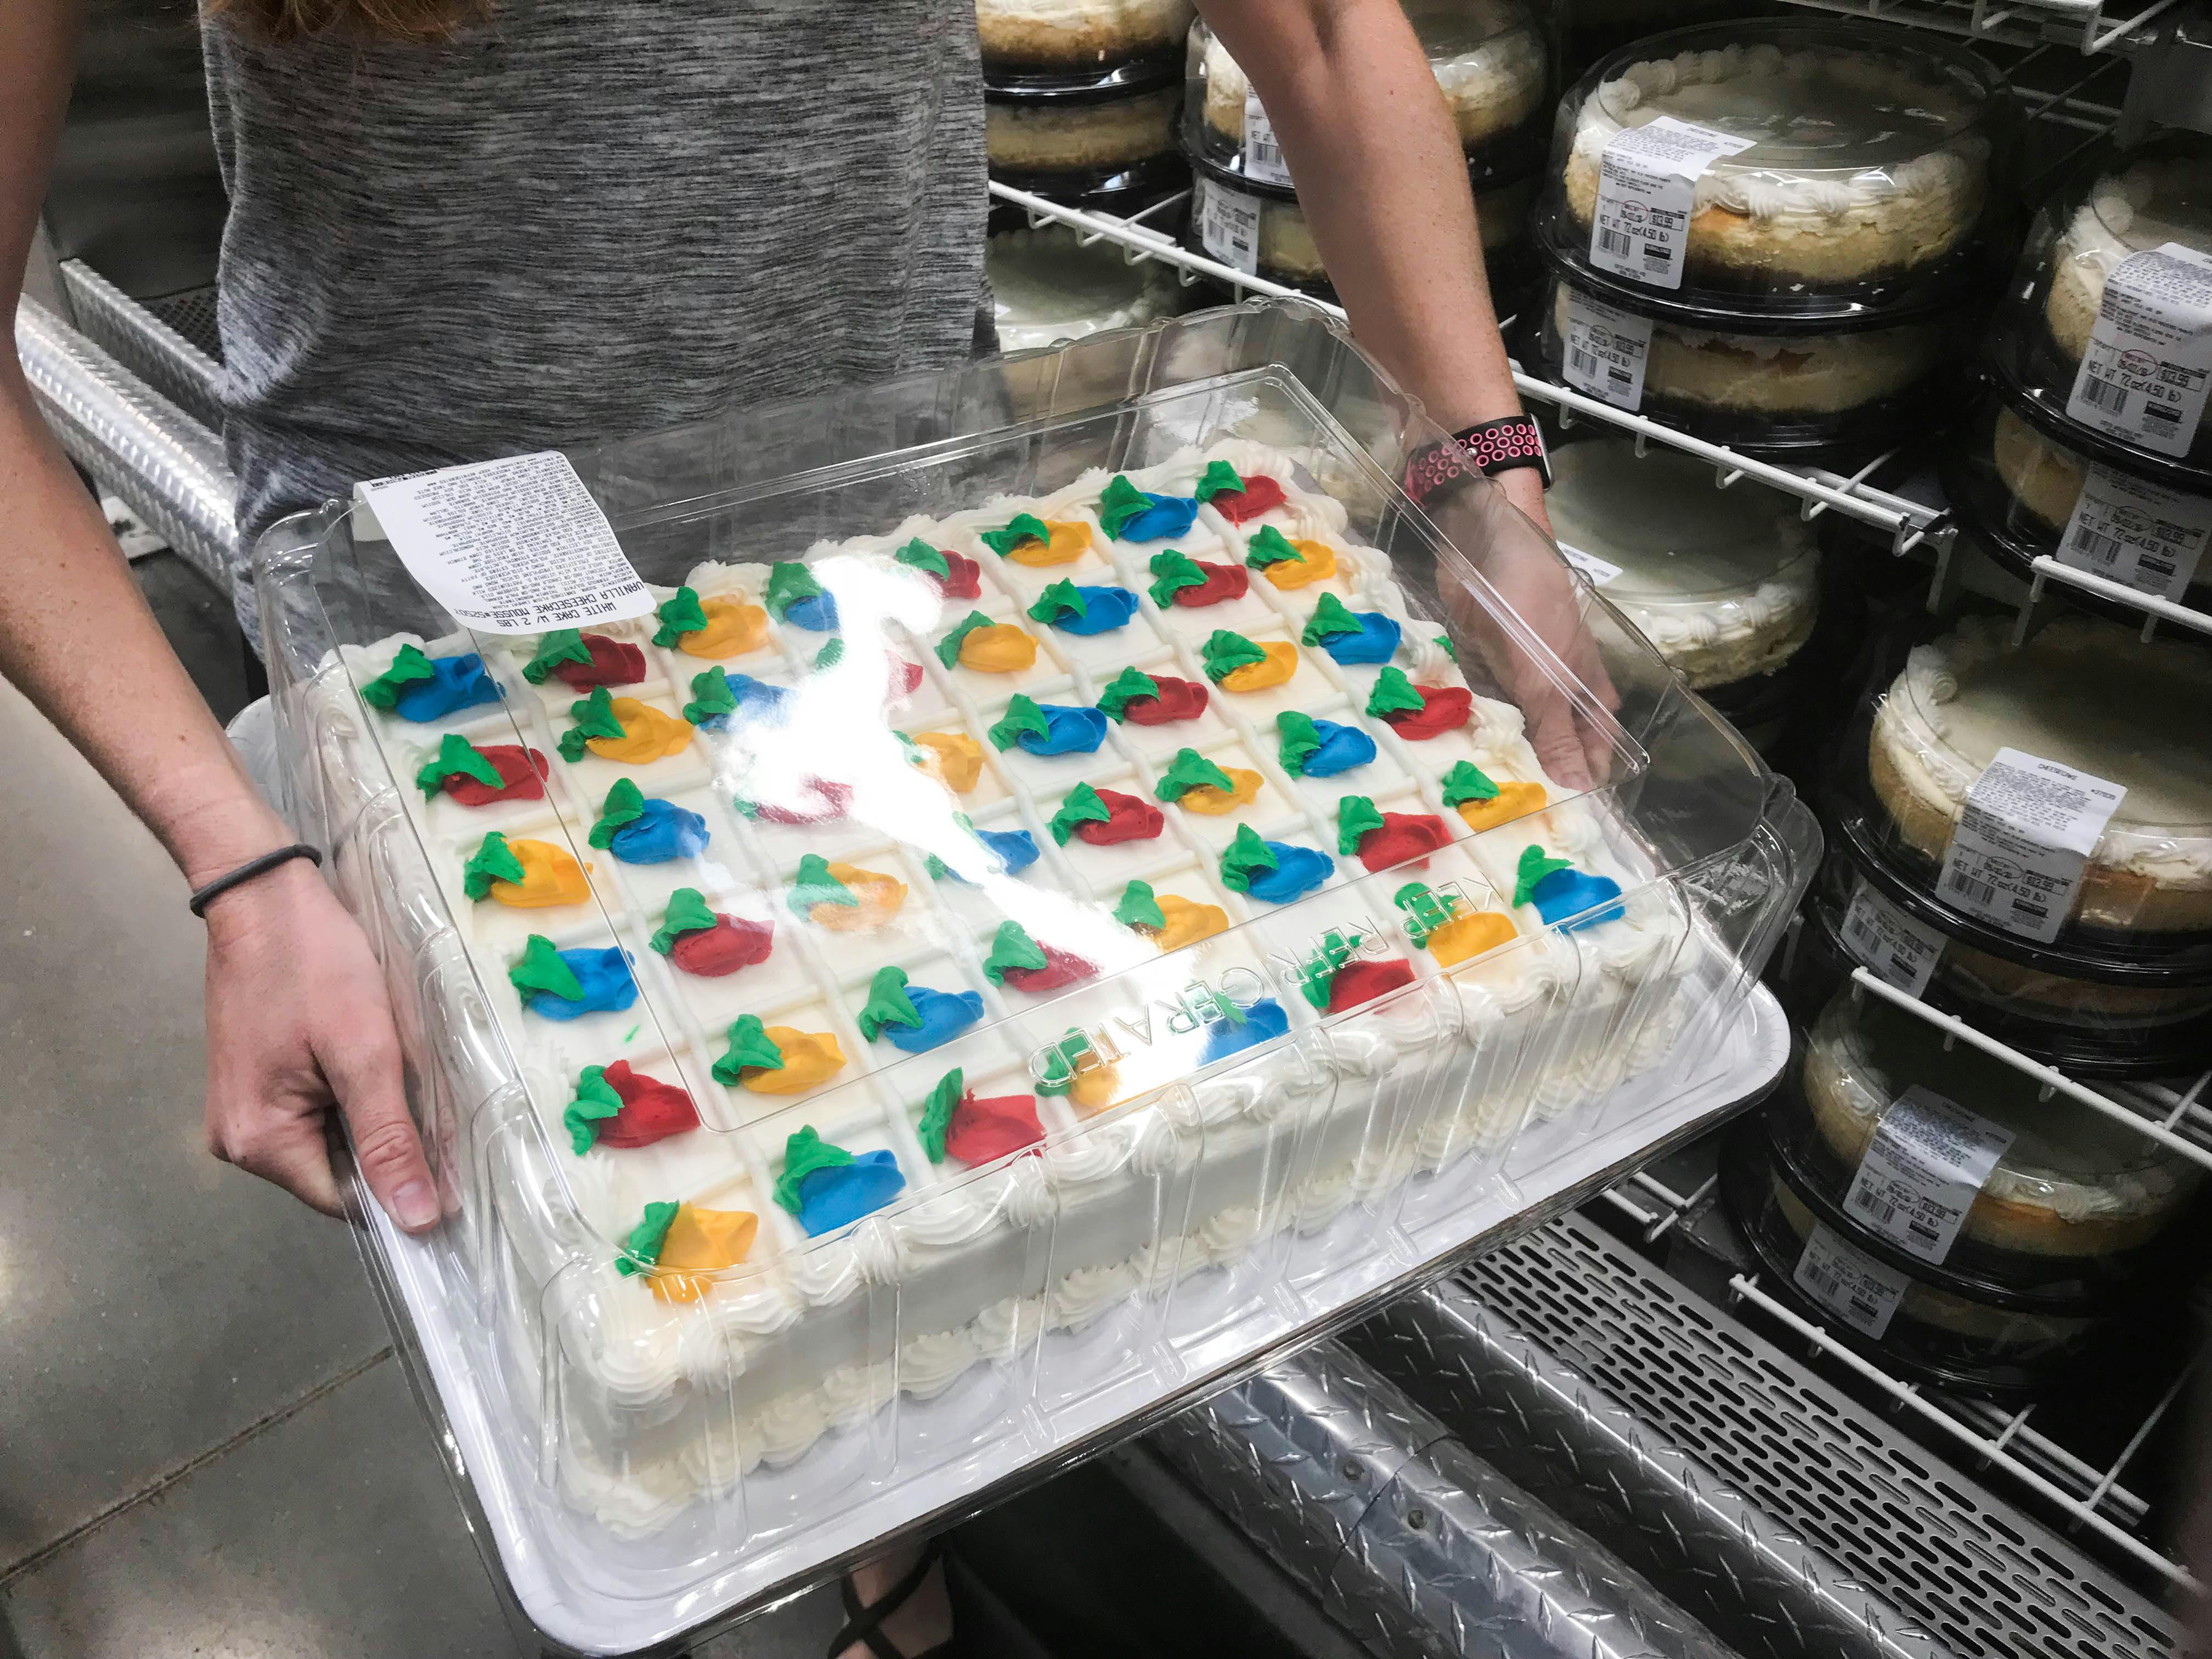 How To Order Cakes At Costco? [Guide Here]